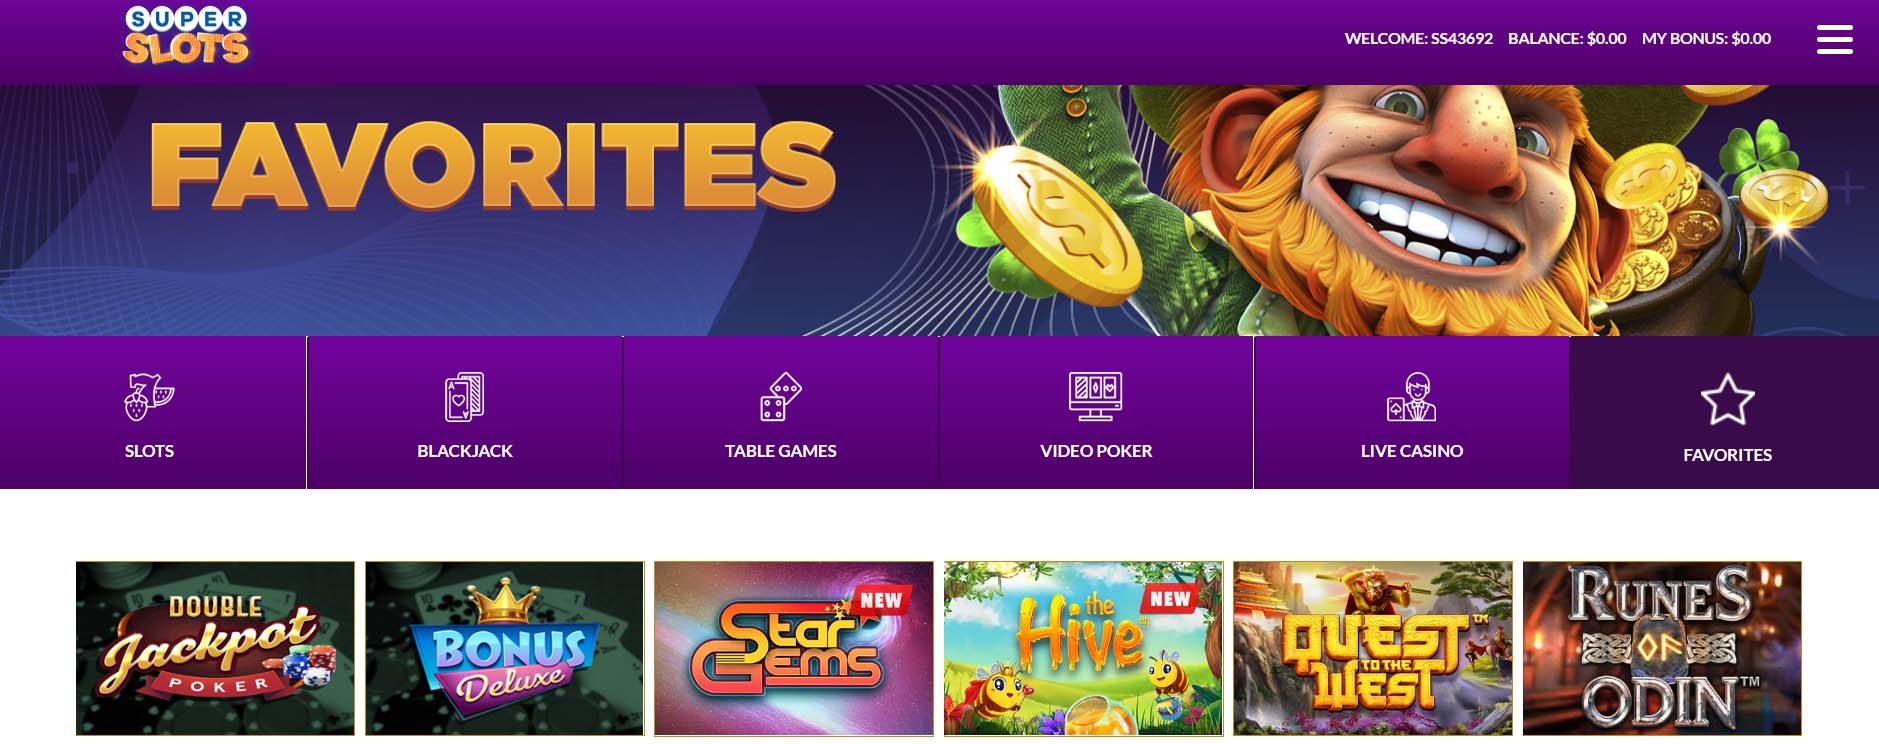 Favorite Casino Games Section